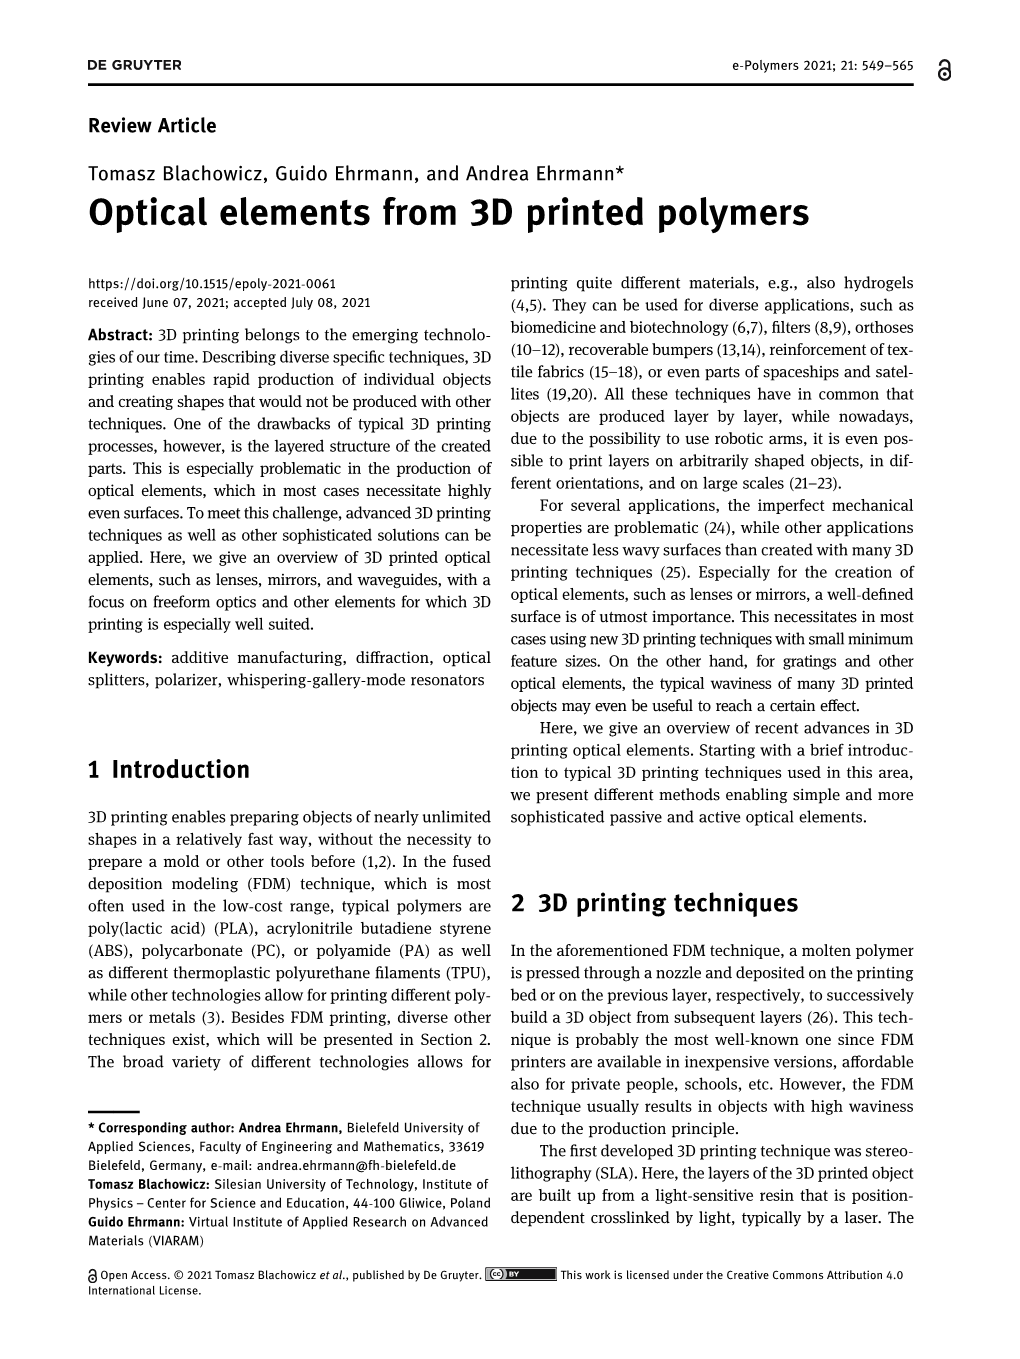 Optical Elements from 3D Printed Polymers